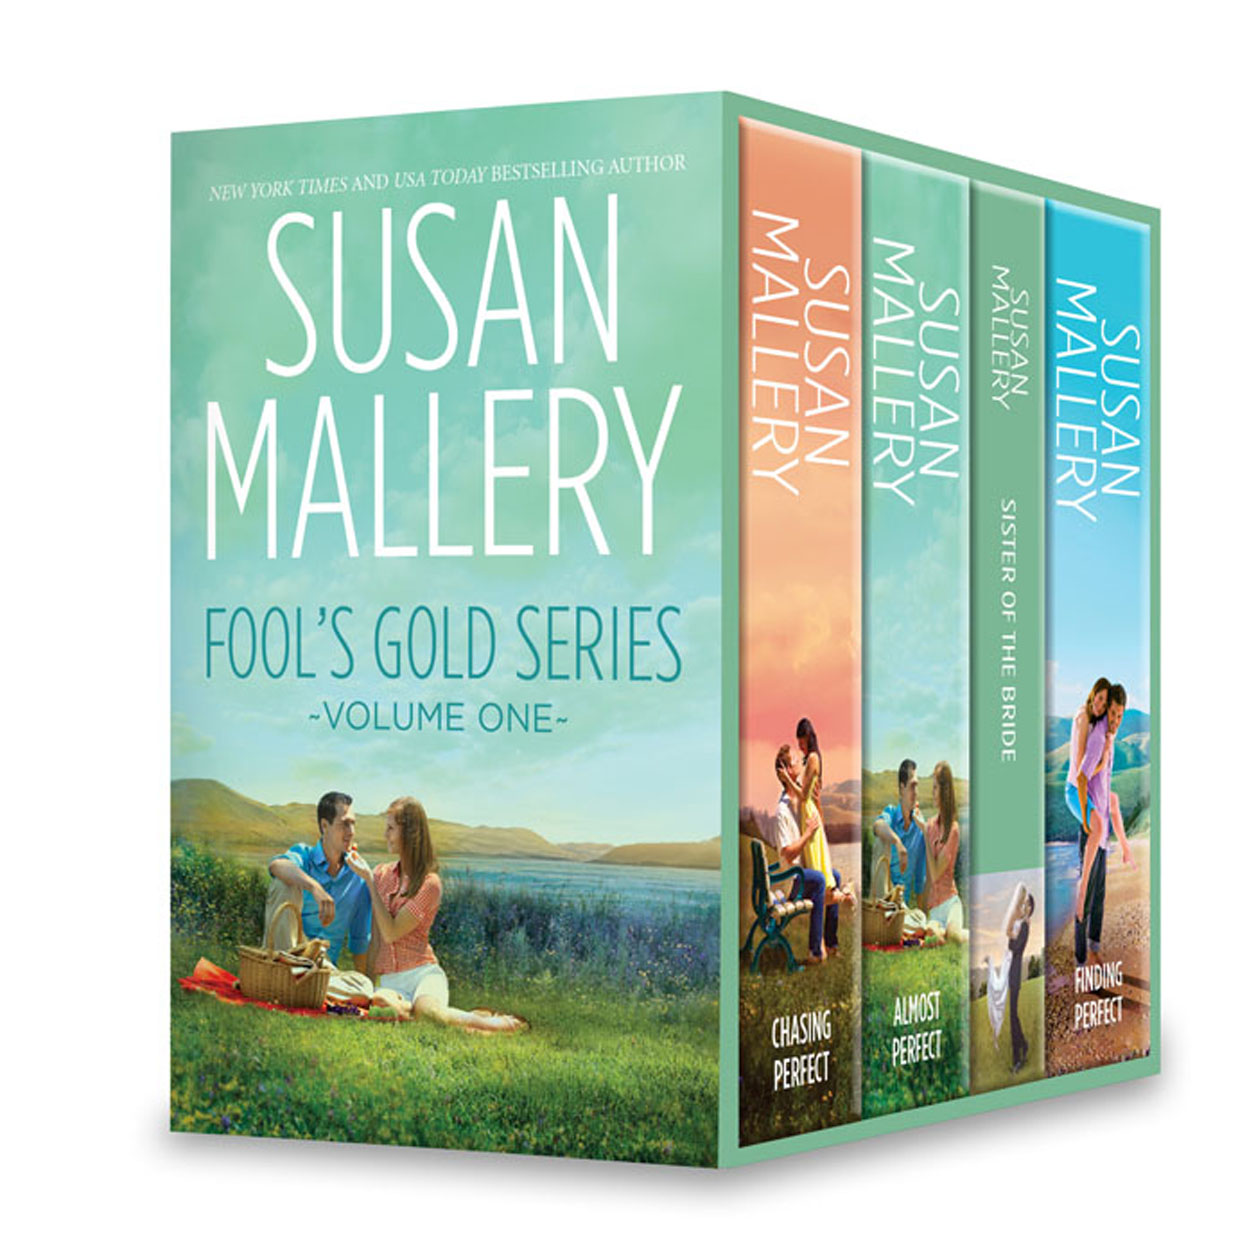 Susan Mallery Fool's Gold Series Volume One: Chasing Perfect\Almost Perfect\Sister of the Bride\Finding Perfect (2014)